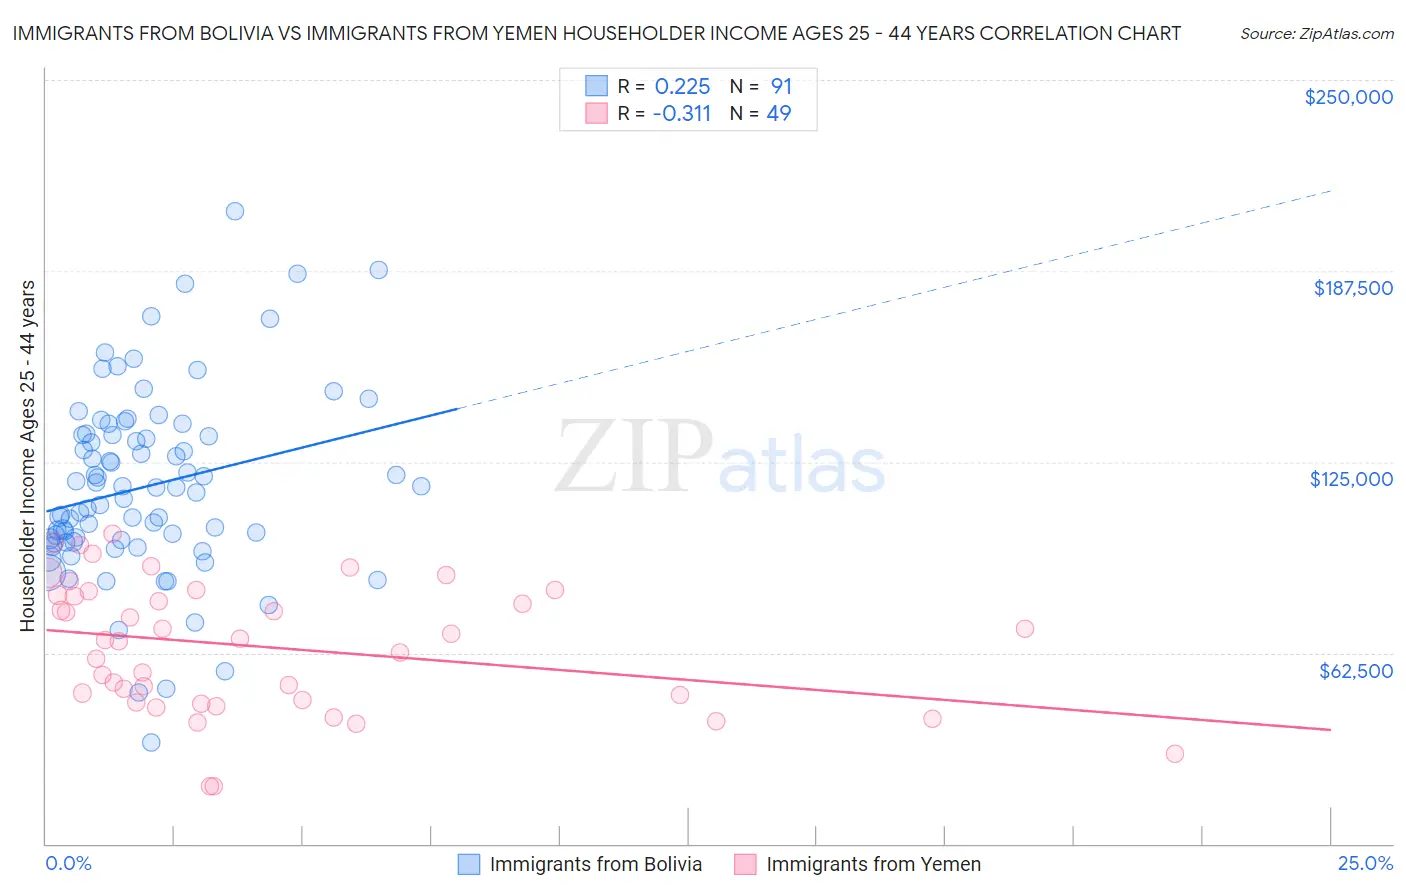 Immigrants from Bolivia vs Immigrants from Yemen Householder Income Ages 25 - 44 years